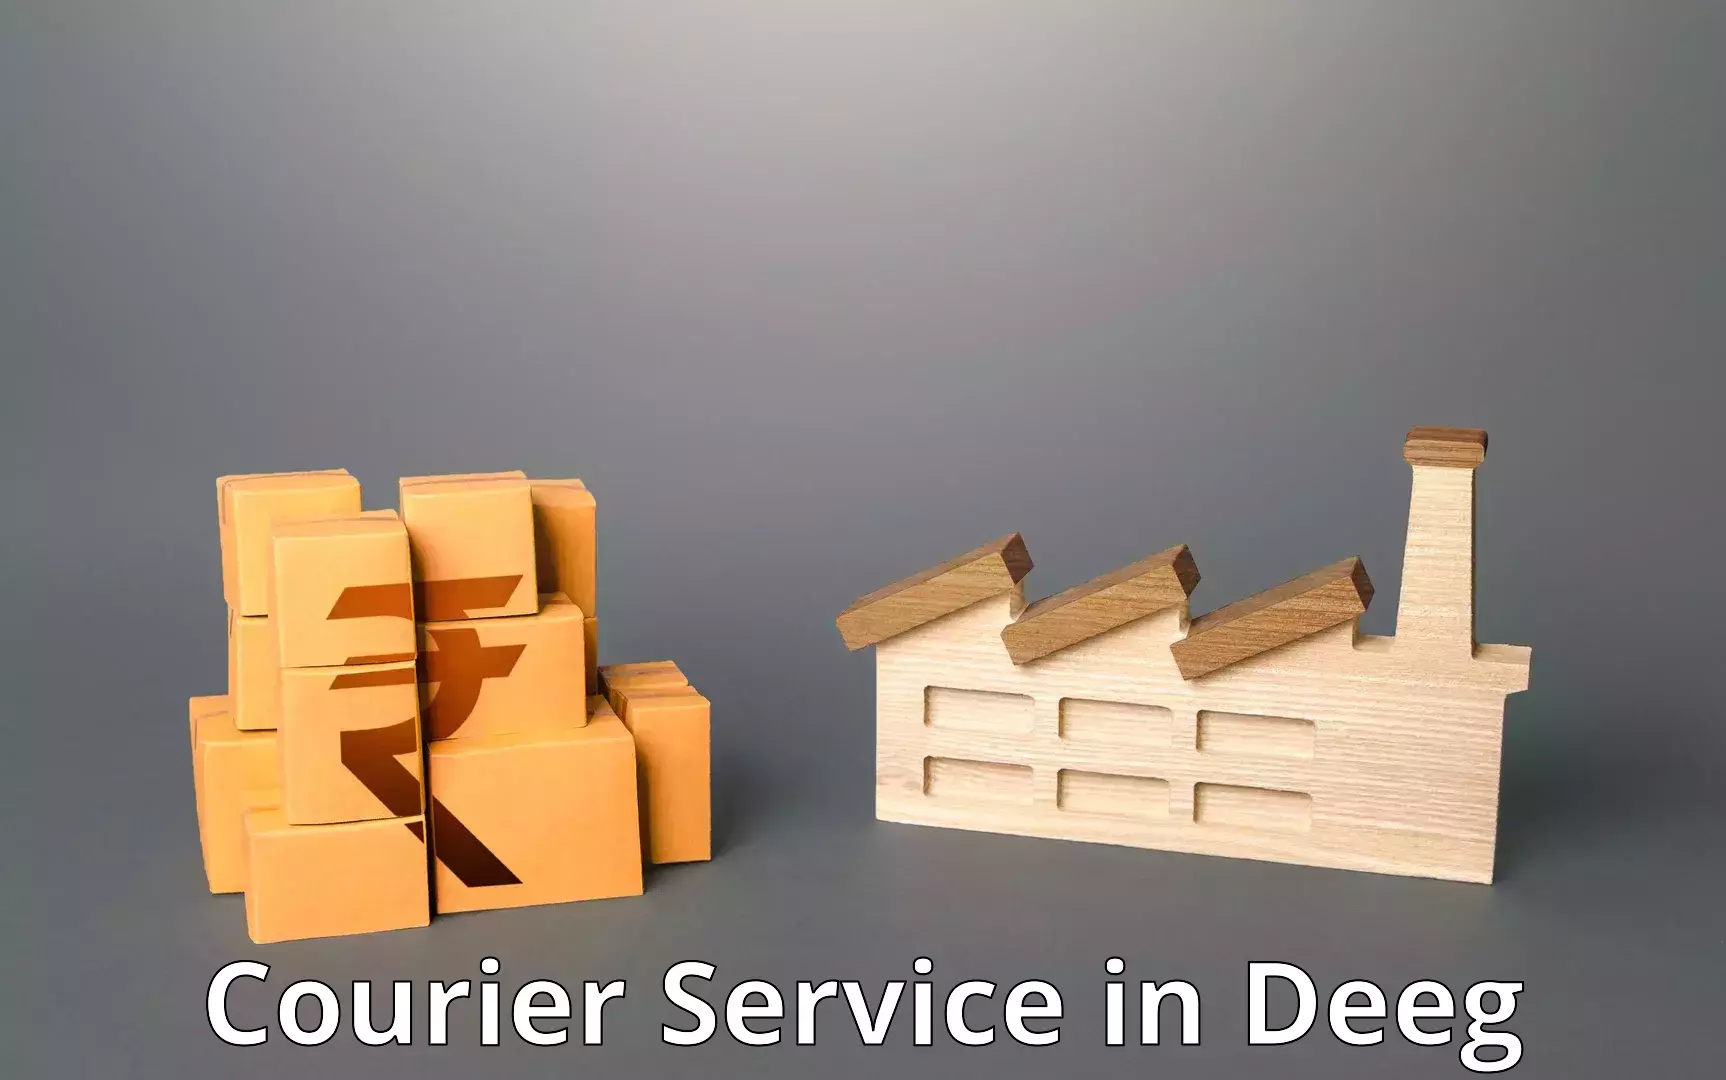 State-of-the-art courier technology in Deeg